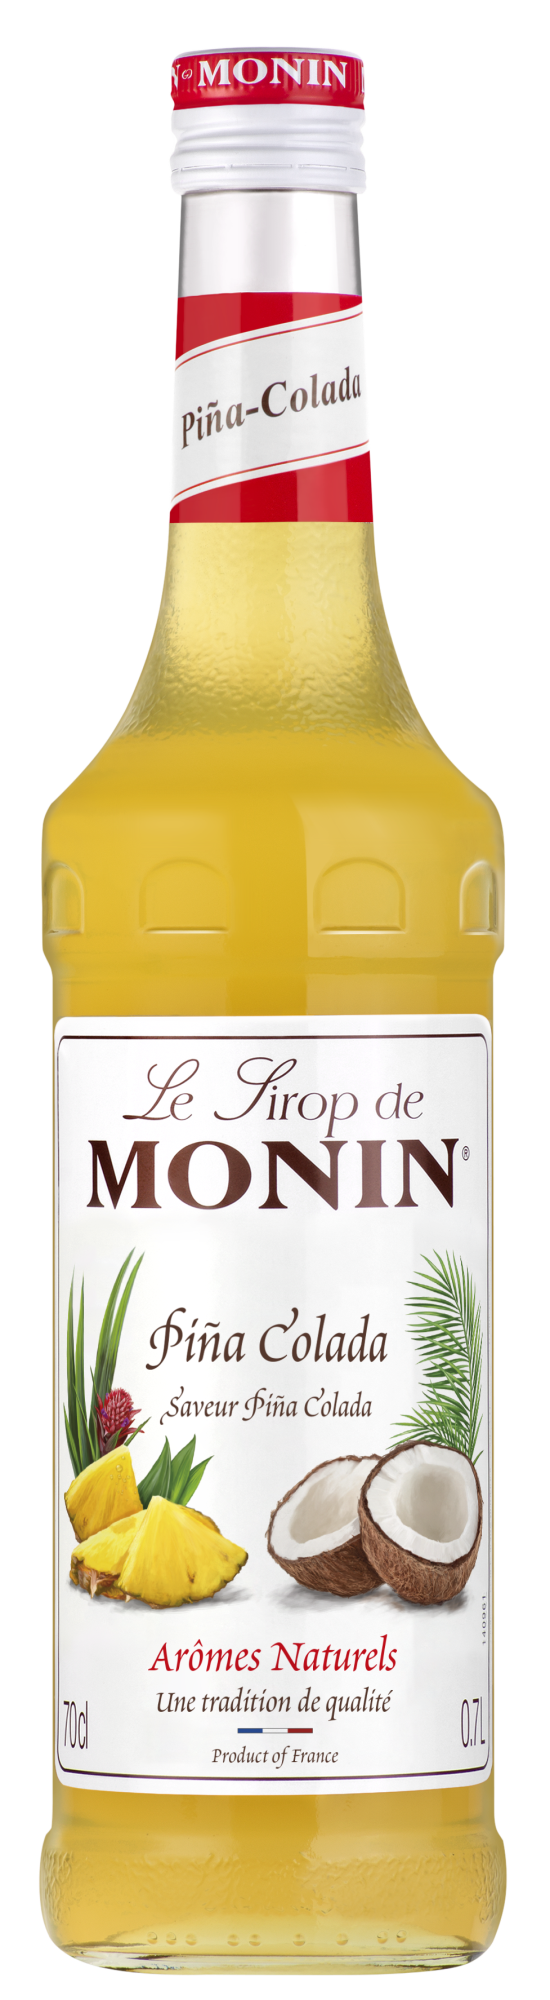 Buy MONIN Pina Colada Syrup. It has the perfect blend of sweetness from the creamy coconut and pineapple.